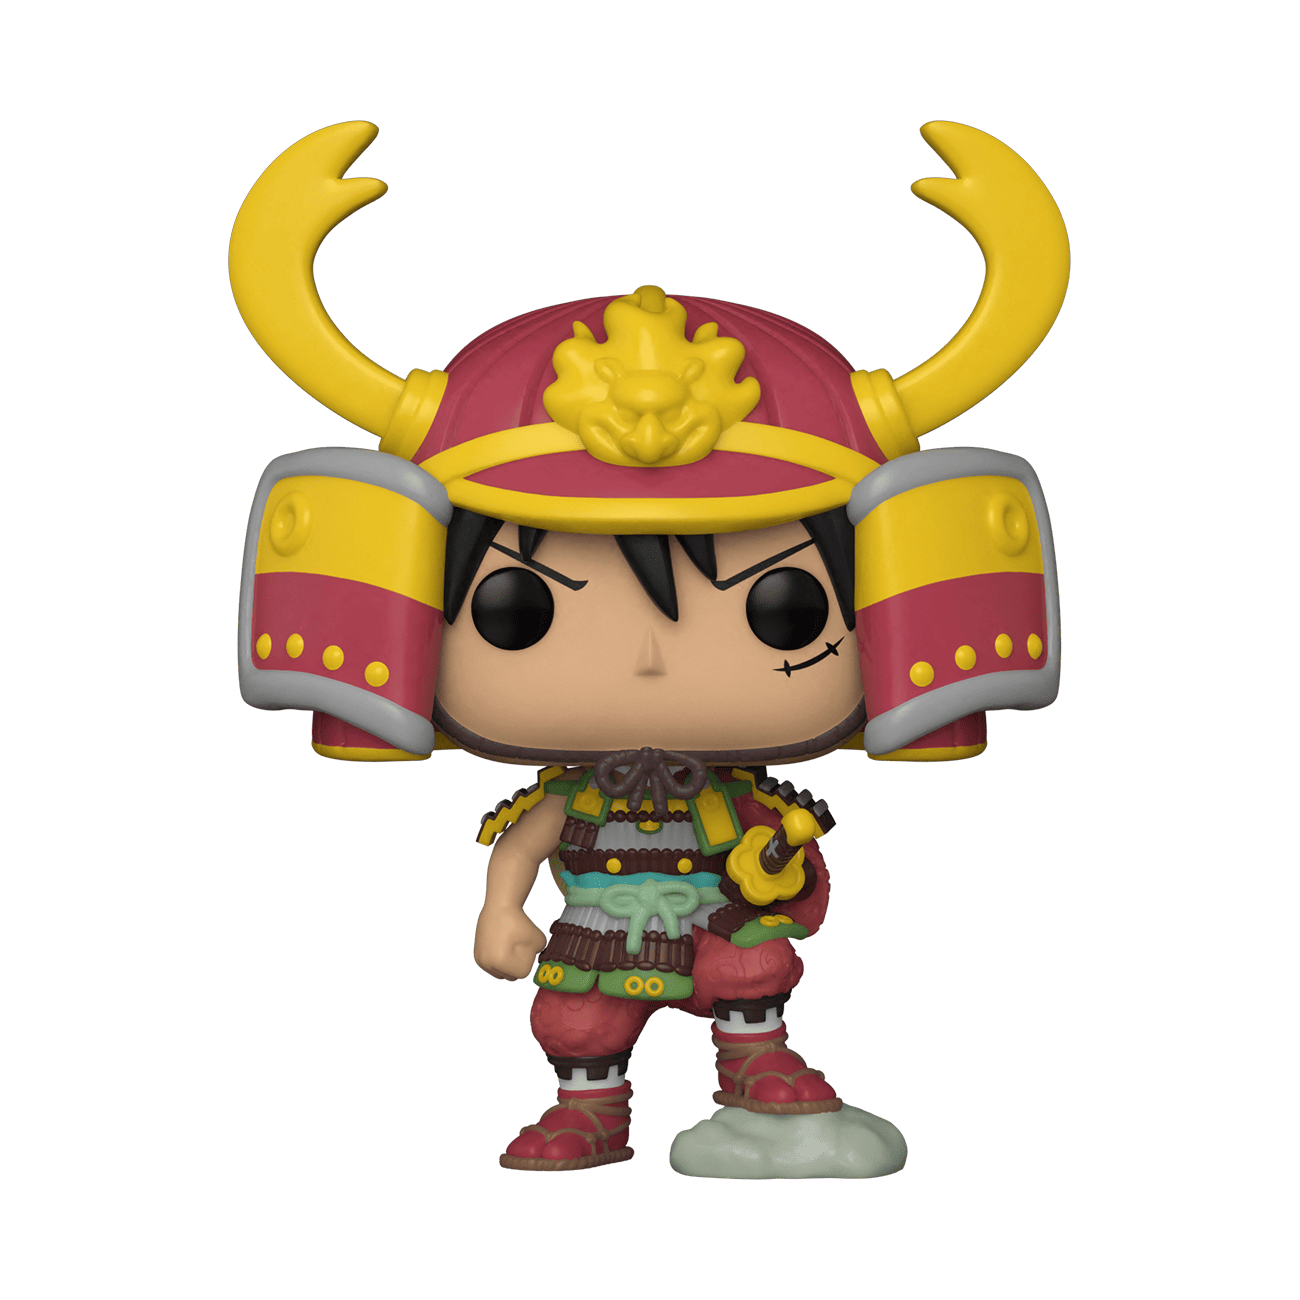 Buy Pop! Armored Luffy at Funko.